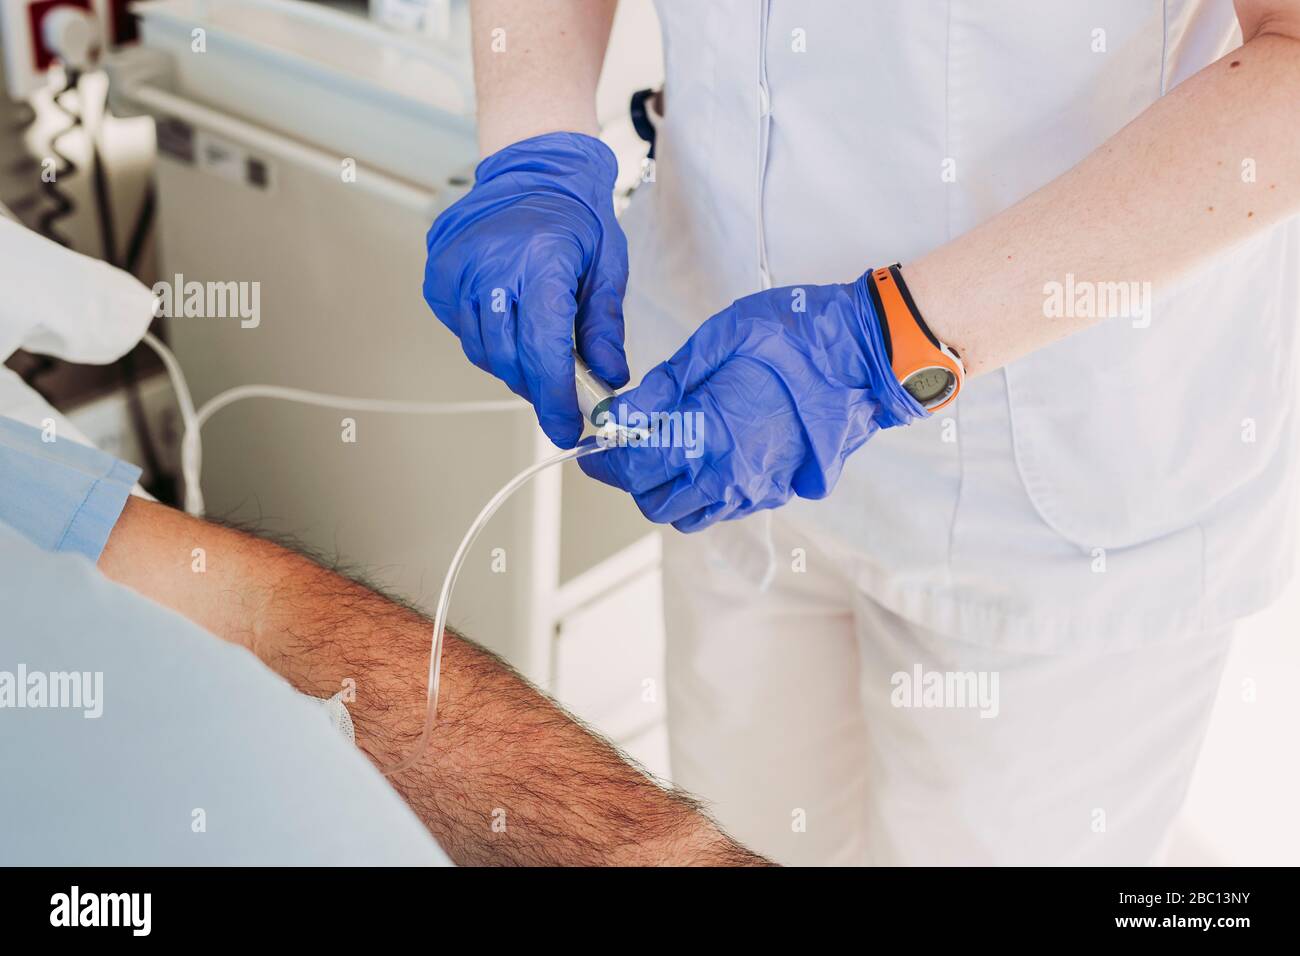 Nurse adjusting iv drip for patient lying in hospital bed Stock Photo